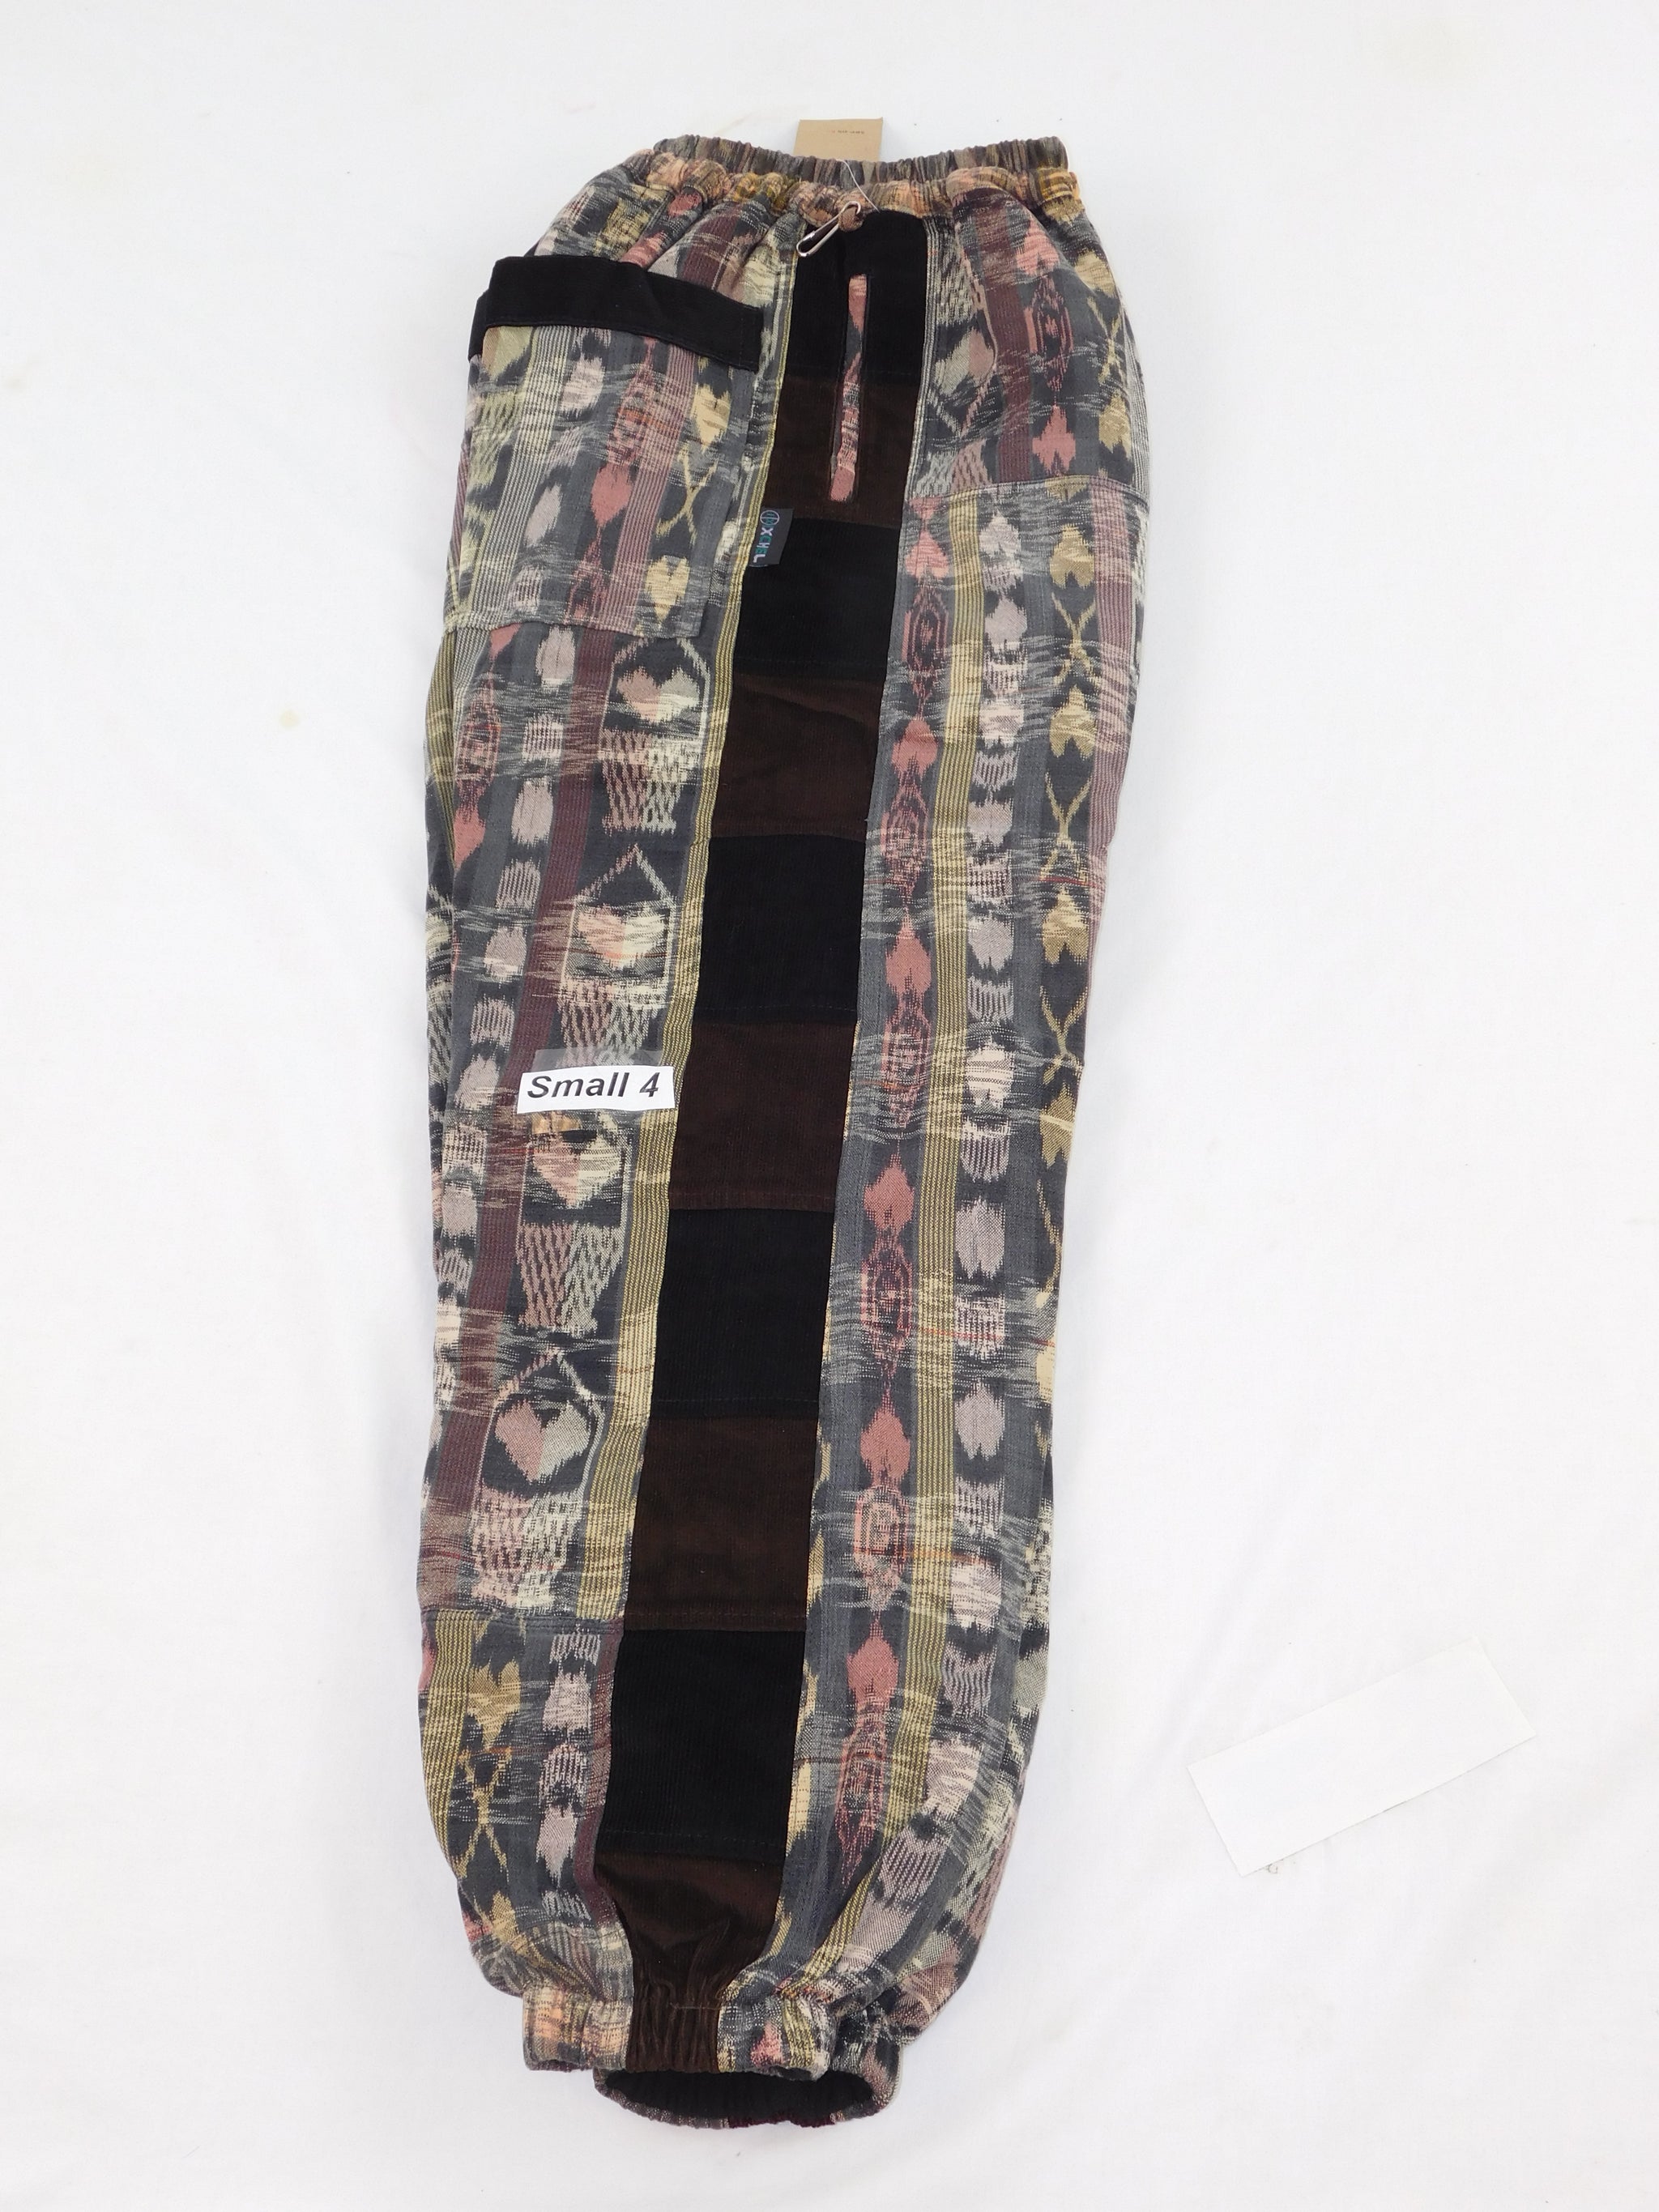 Hand Woven Patchwork Snowboard Pants with Fleece Lining